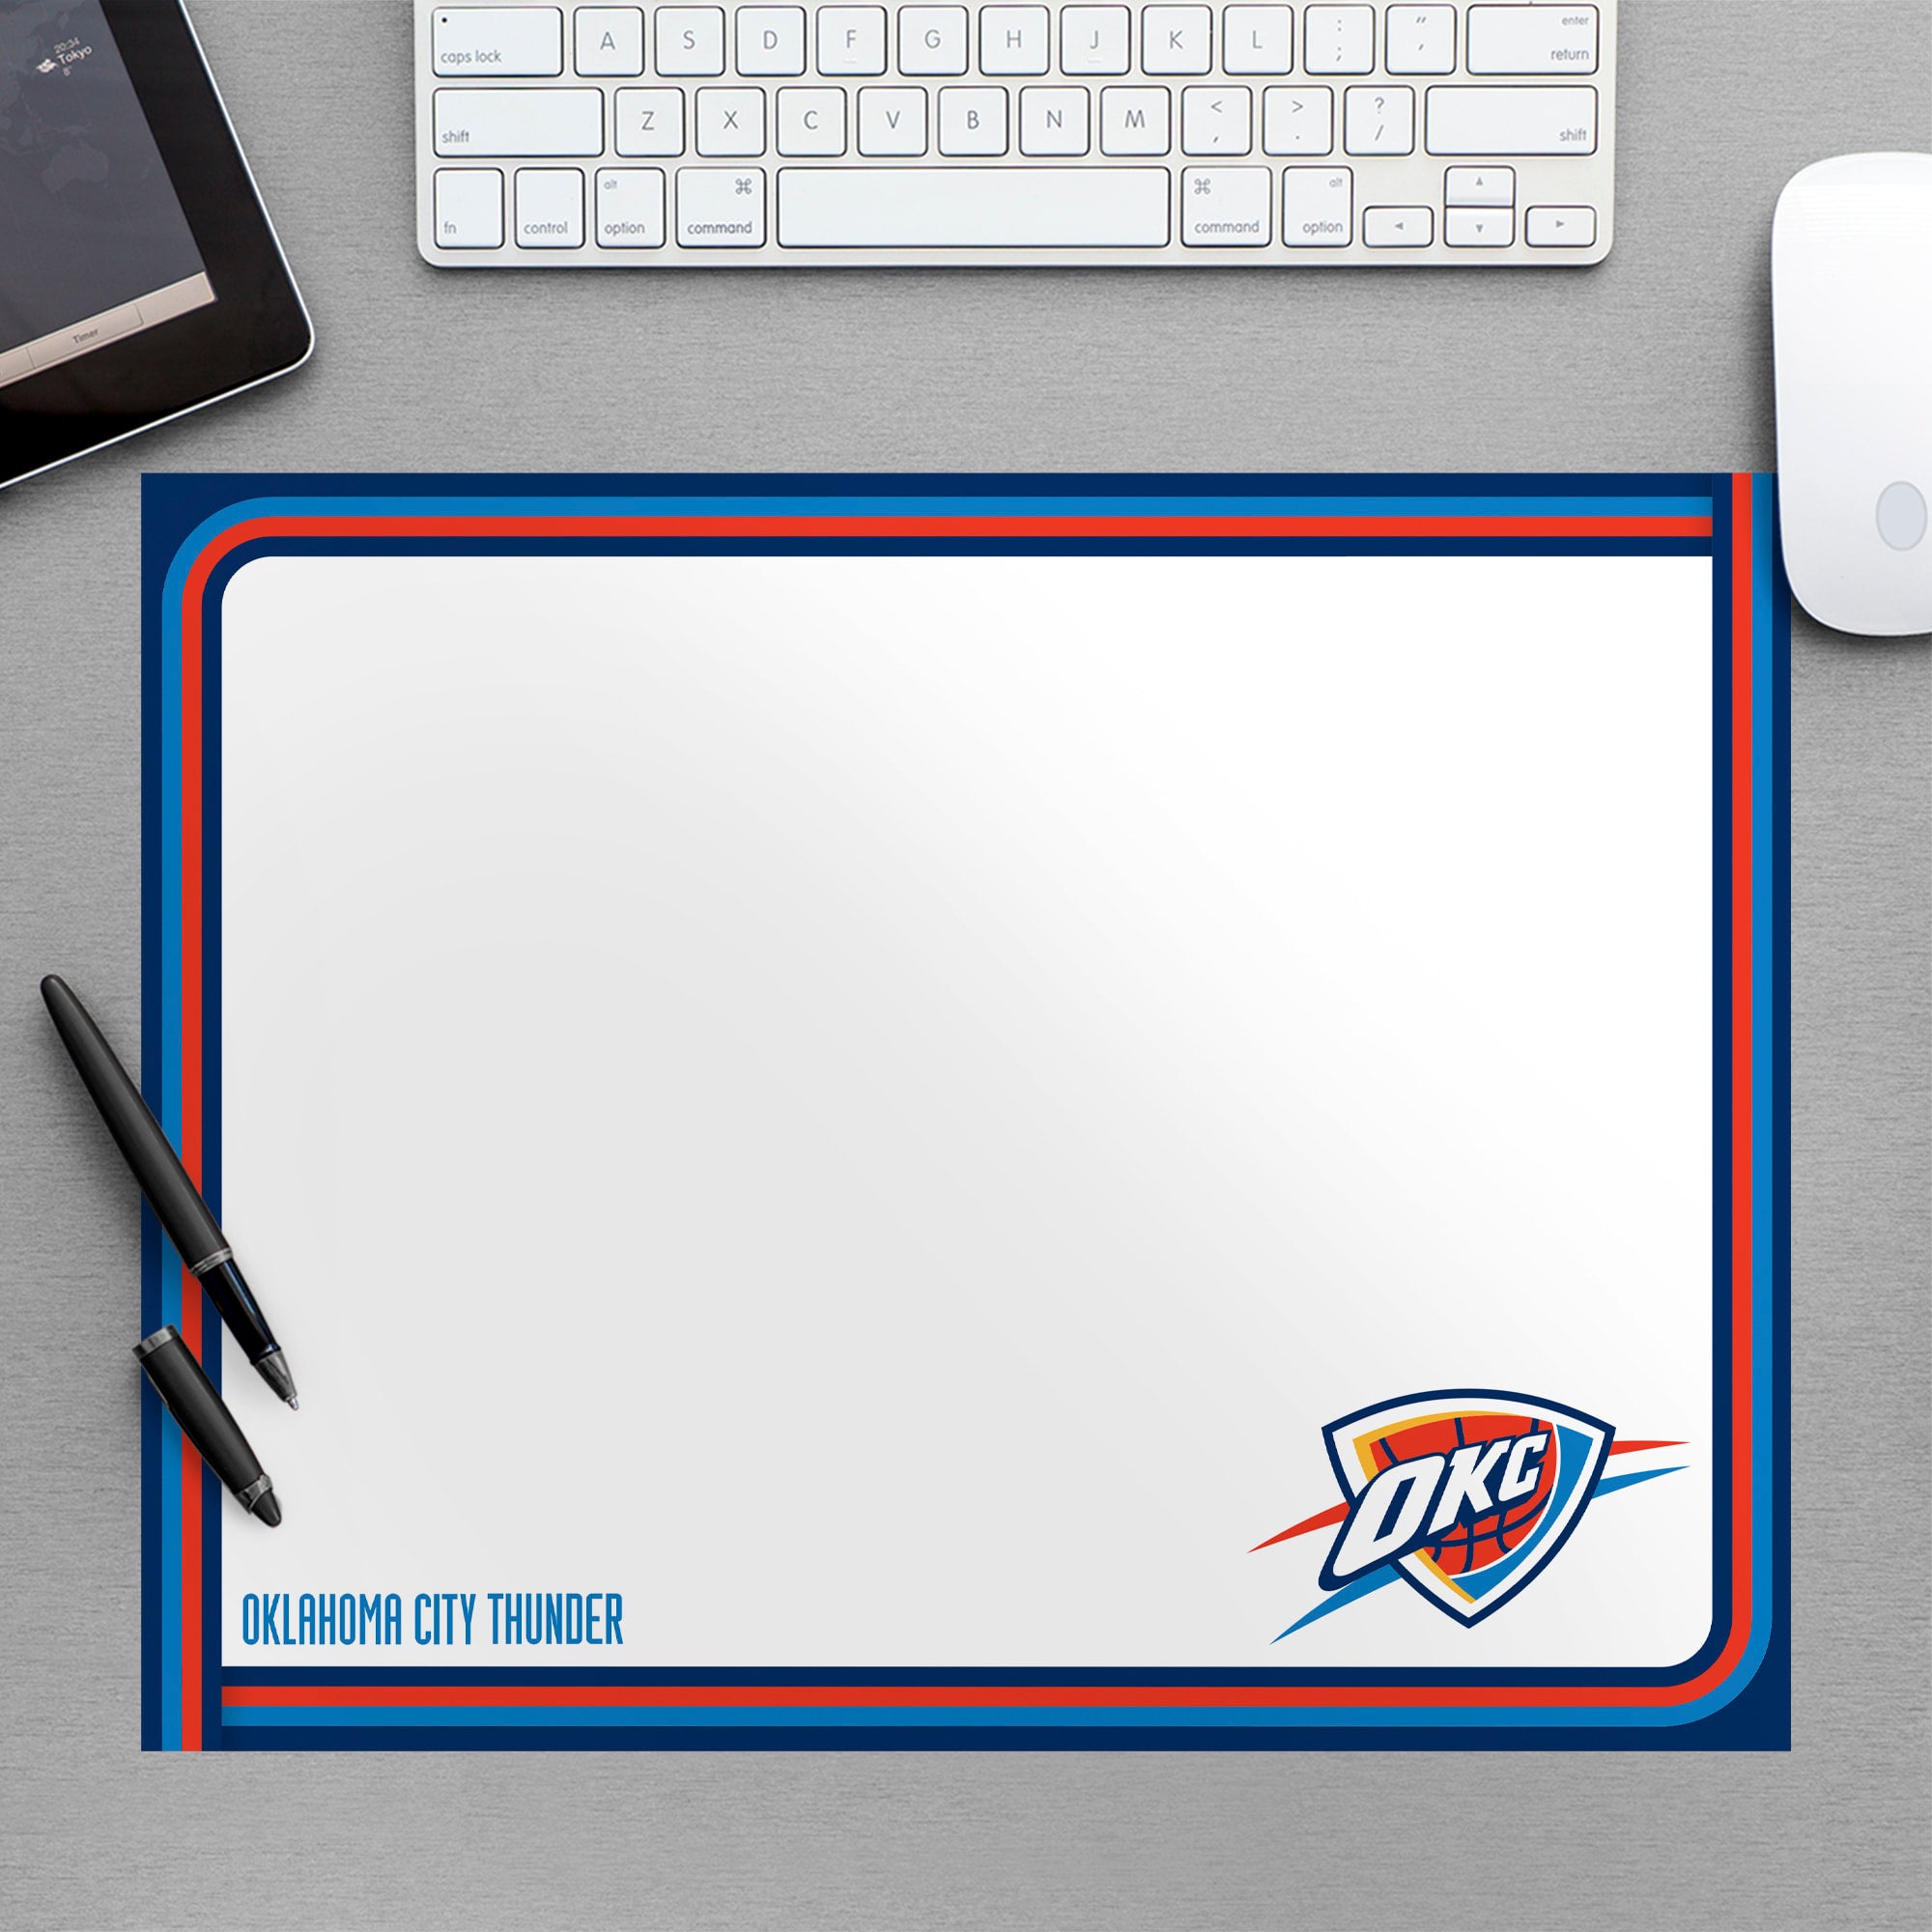 Oklahoma City Thunder for Oklahoma City Thunder: Dry Erase Whiteboard - Officially Licensed NBA Removable Wall Decal Large by Fa